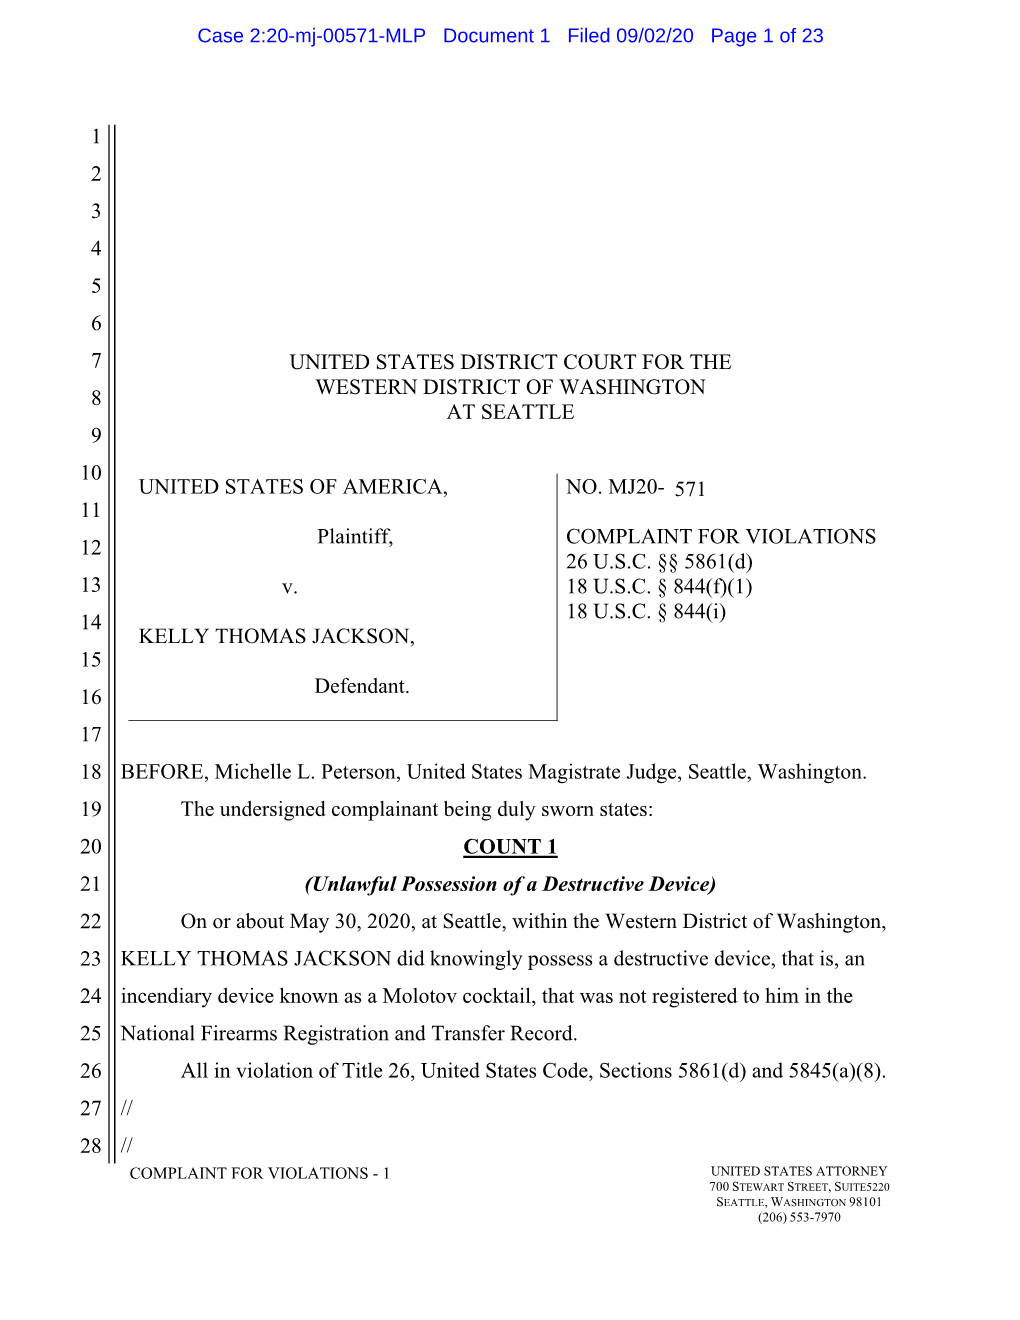 Case 2:20-Mj-00571-MLP Document 1 Filed 09/02/20 Page 1 of 23